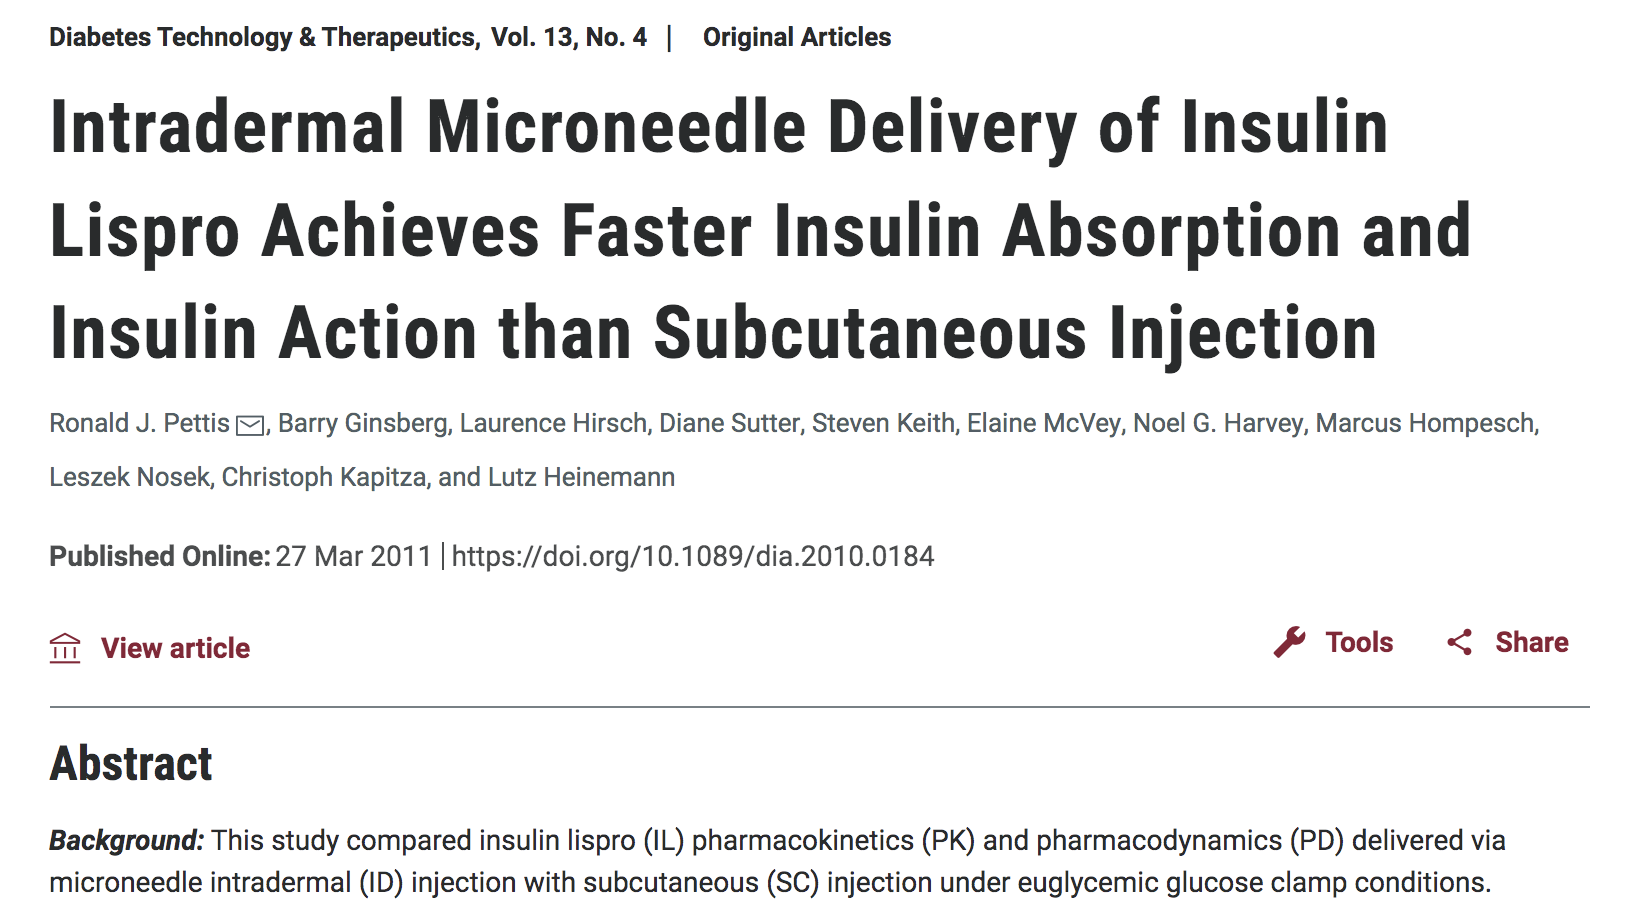 Intradermal microneedle delivery of insulin lispro achieves faster insulin absorption and insulin action than subcutaneous injection thumbnail